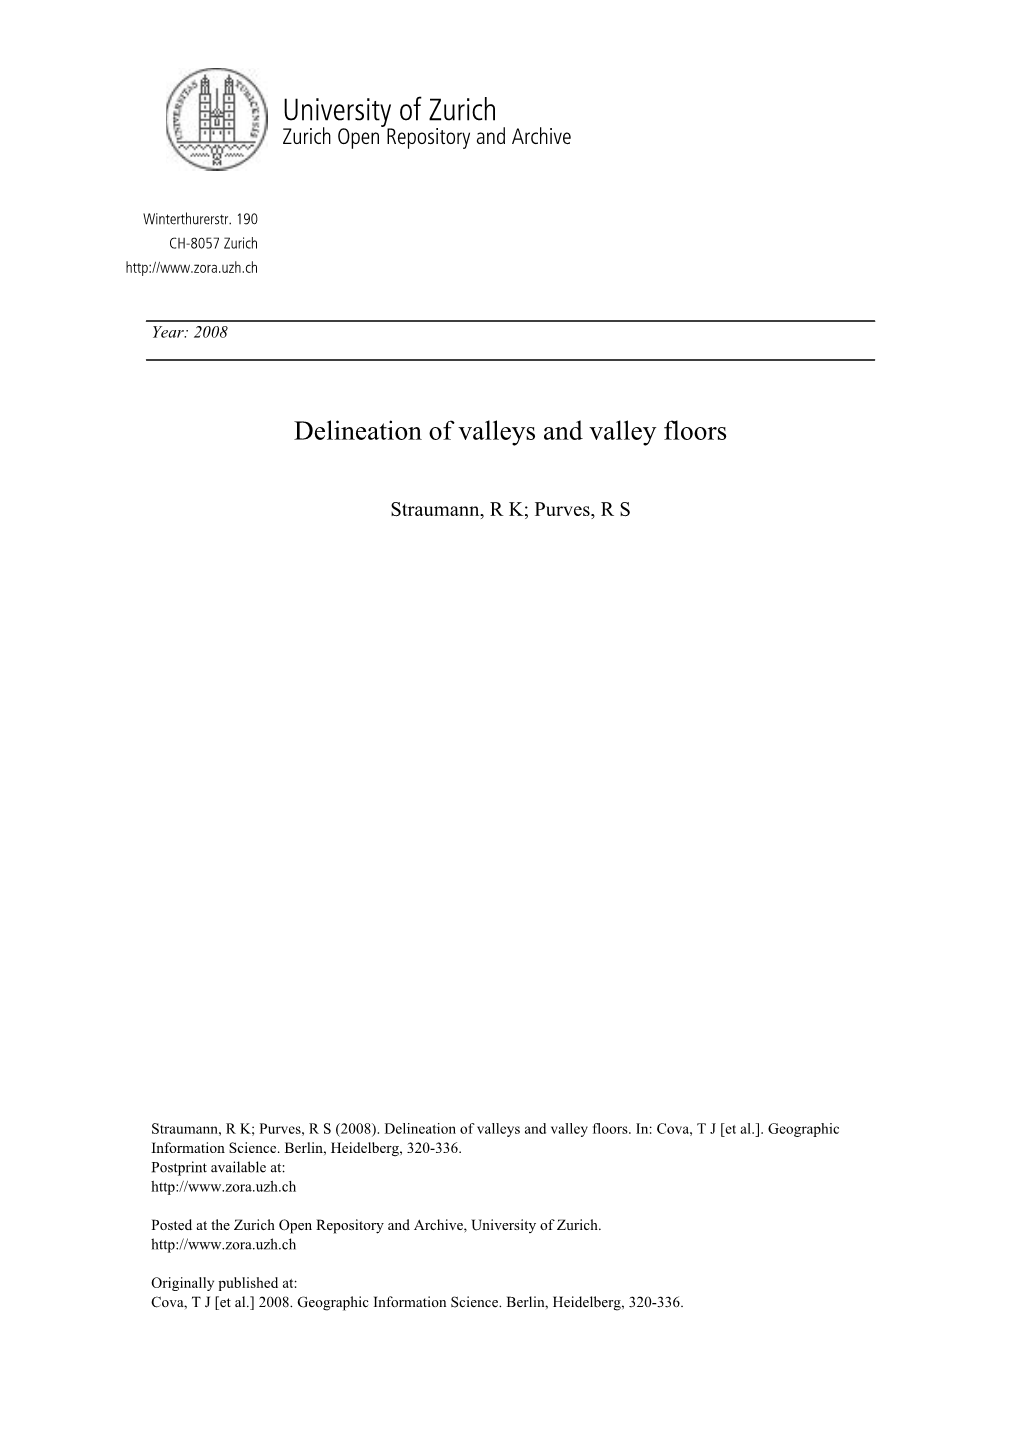 Delineation of Valleys and Valley Floors